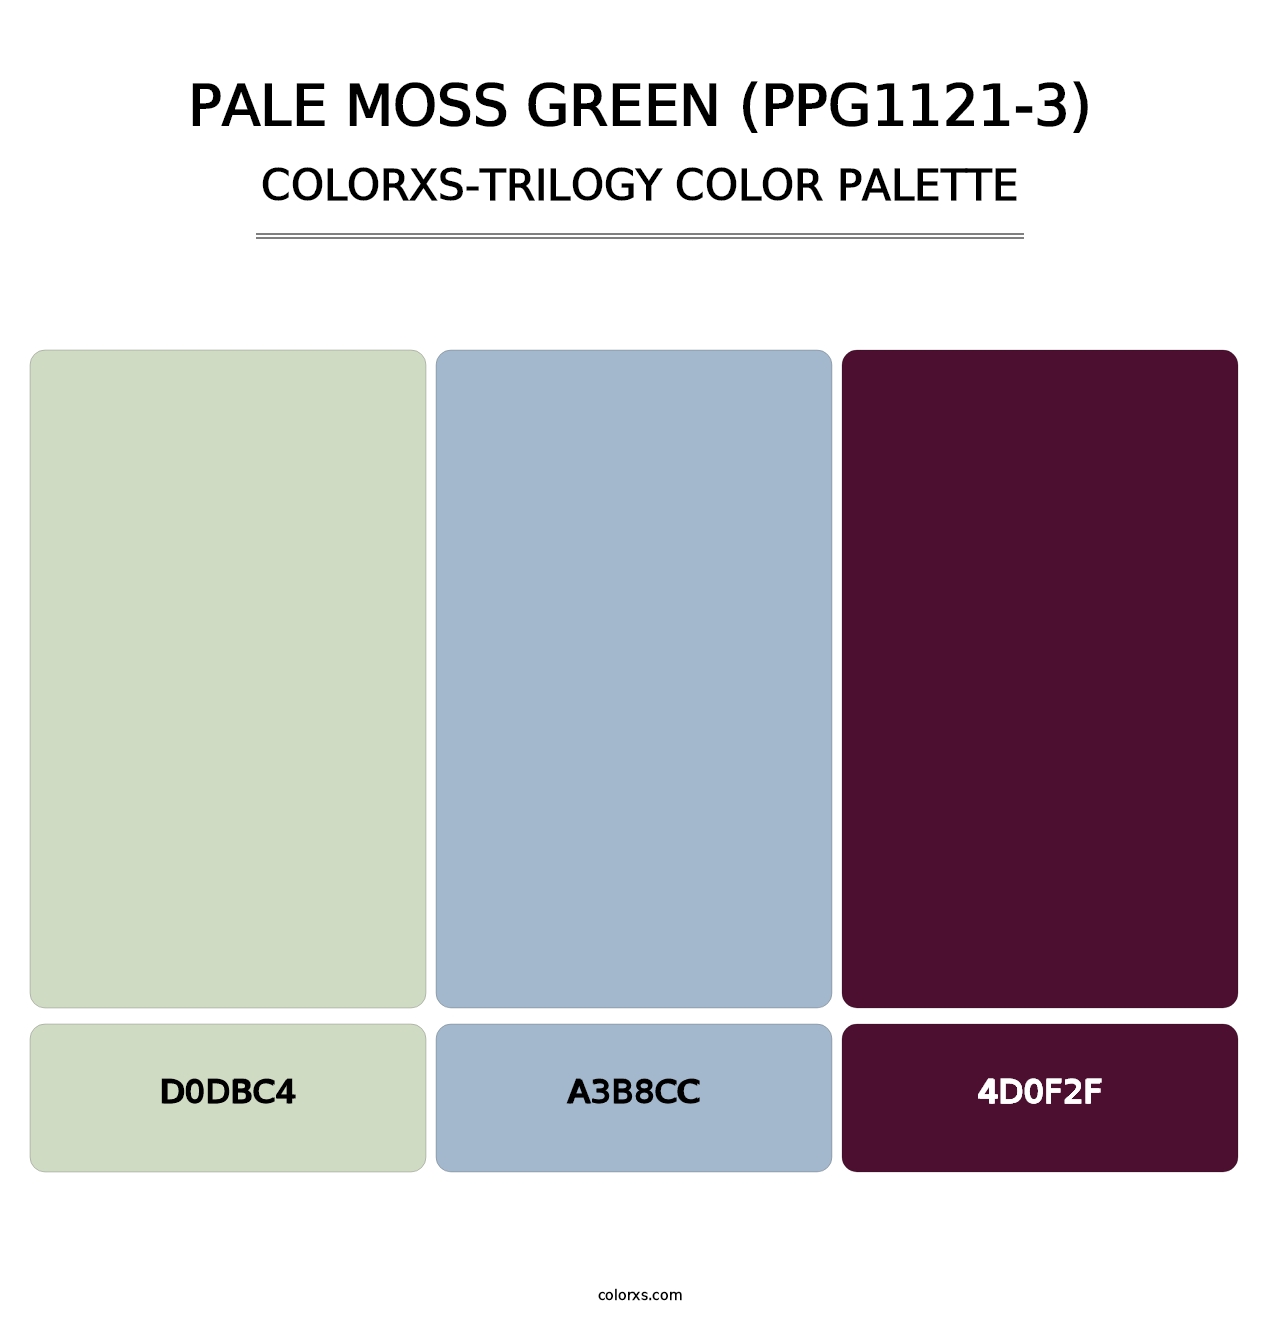 Pale Moss Green (PPG1121-3) - Colorxs Trilogy Palette